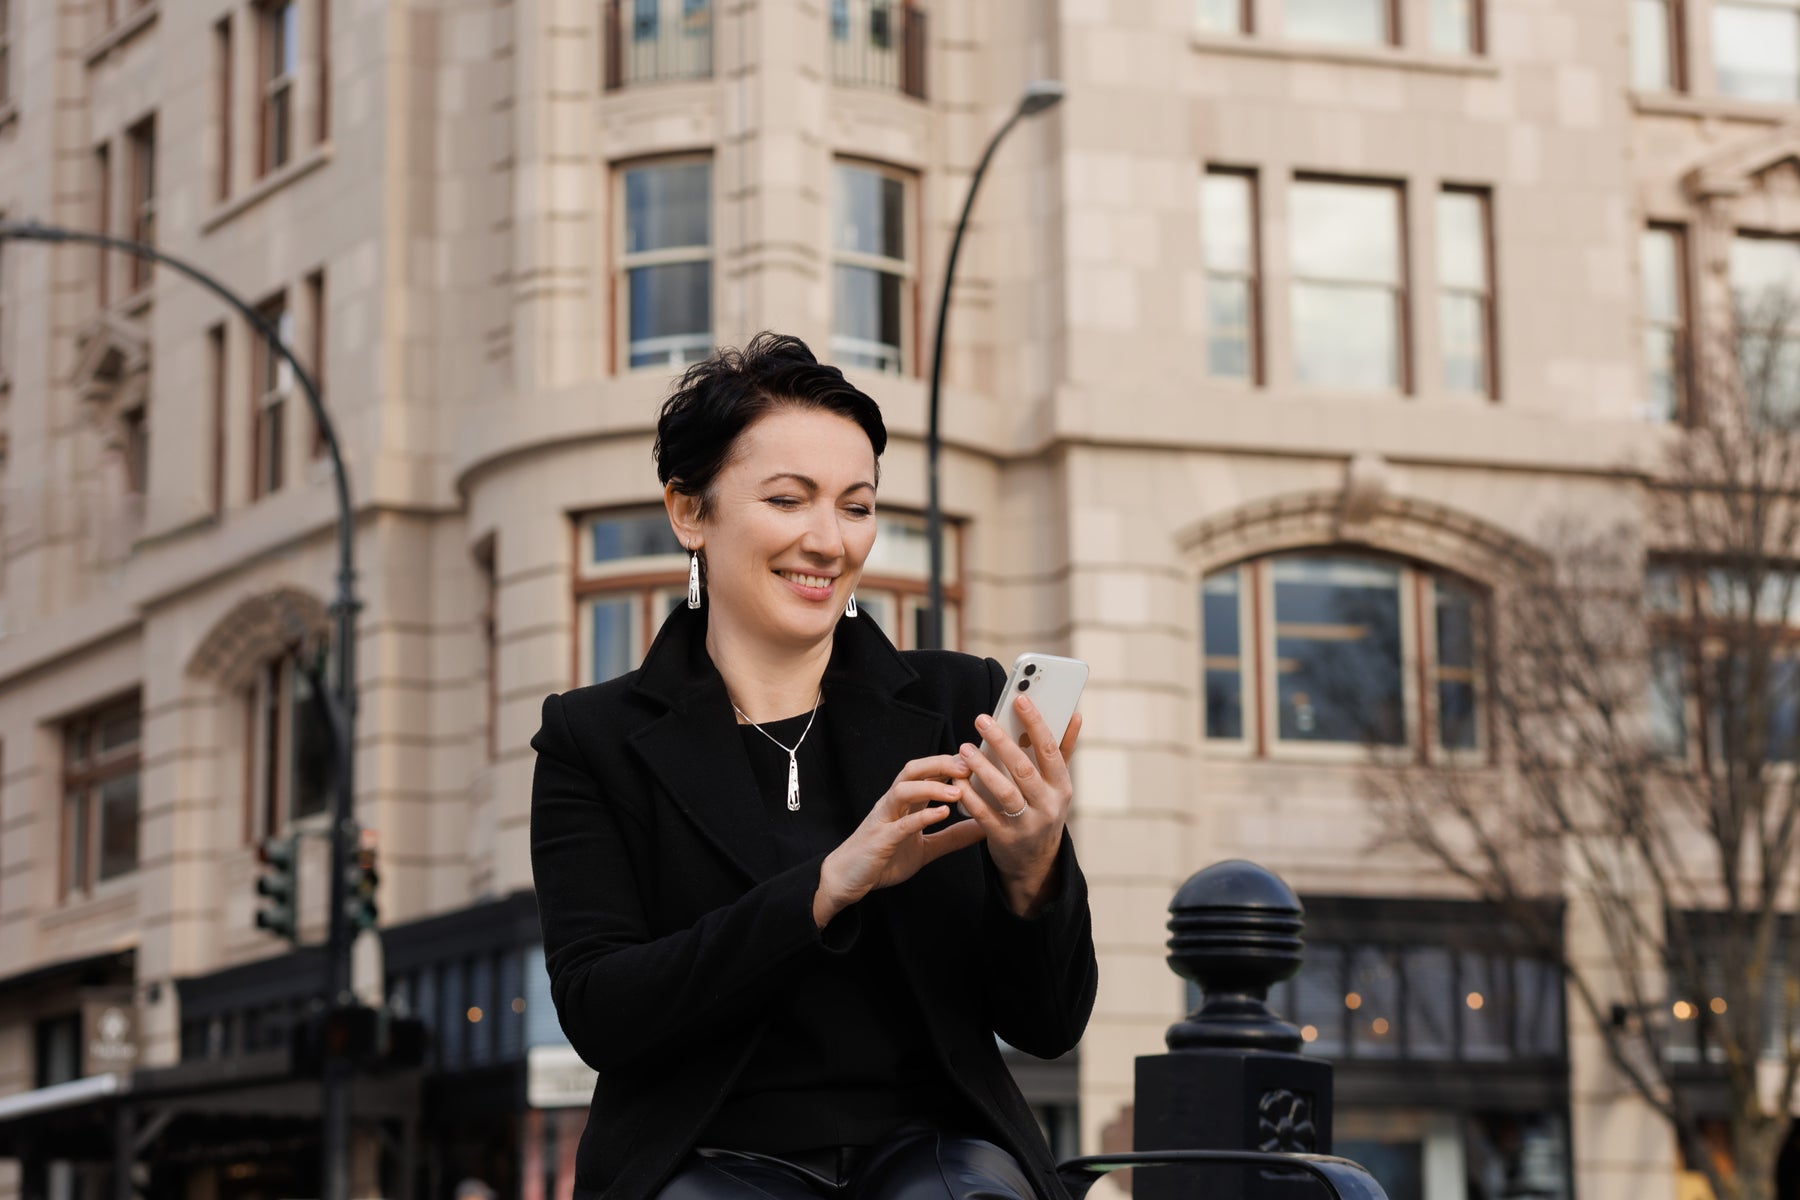 40 to 50-year-old woman in a city wearing sophisticated work attire and Indigenous jewellery looking at an iPhone. Photo is meant to encourage and promote Google Reviews.